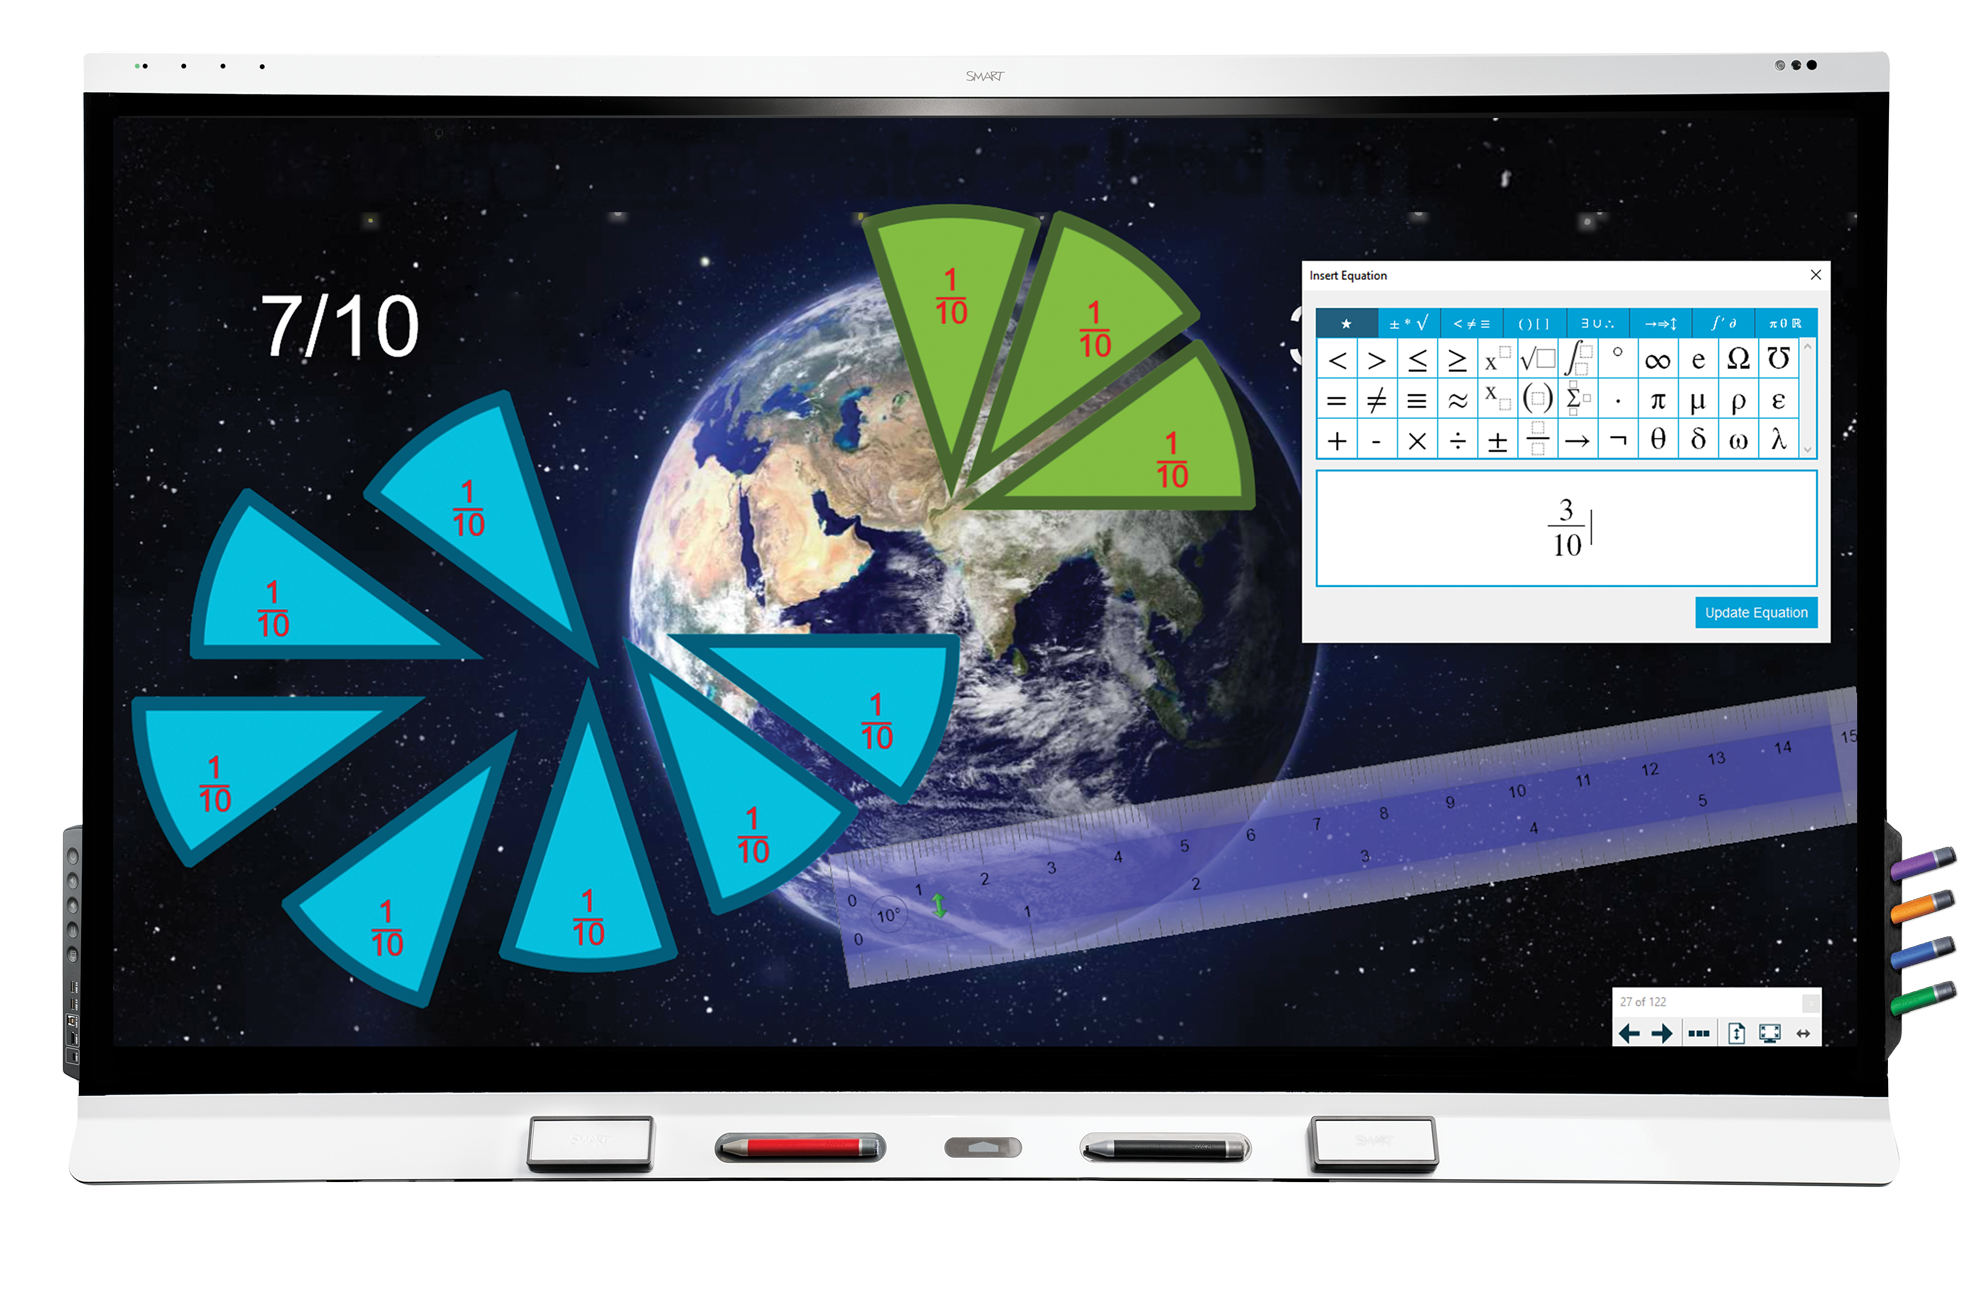 SMART Notebook educational tool displayed on a SMART Board featuring a space scene and math fractions exercise, free to download.